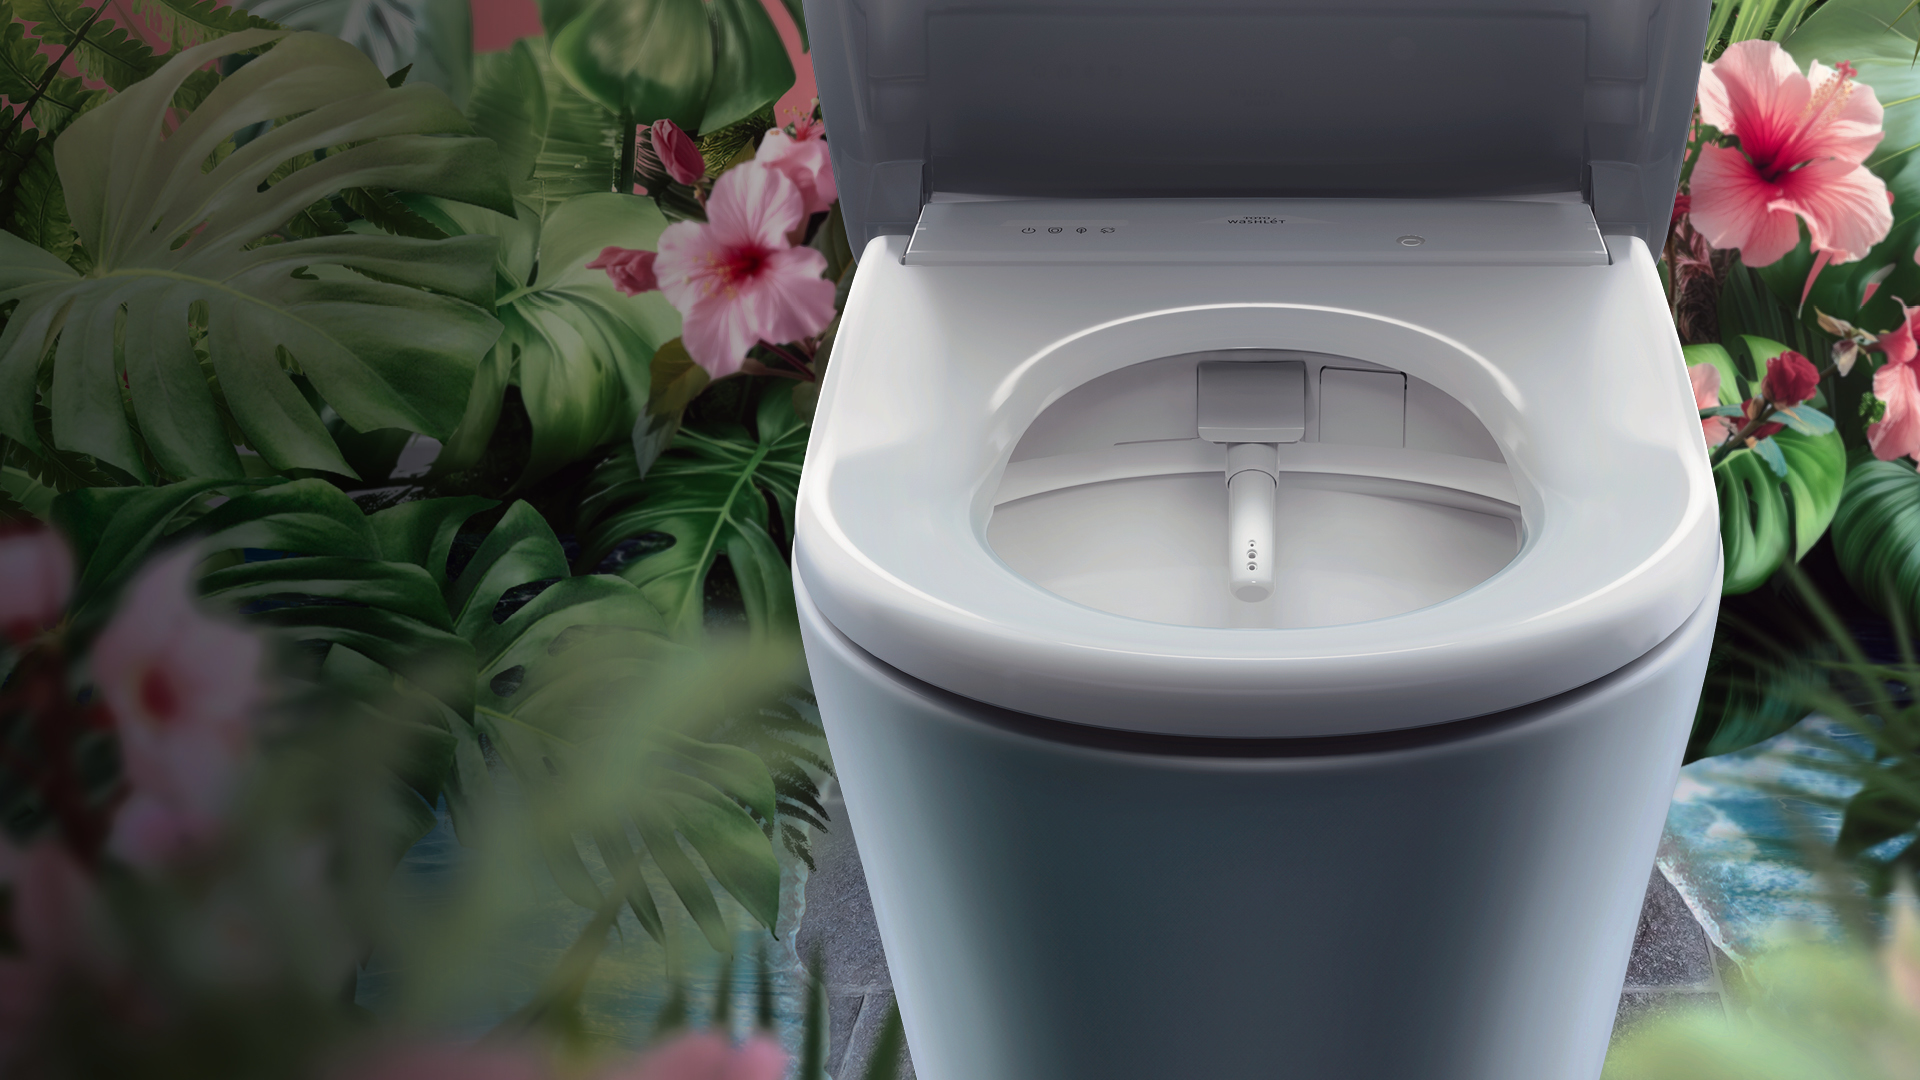 TOTO Toilet with WASHLET with wand extended.